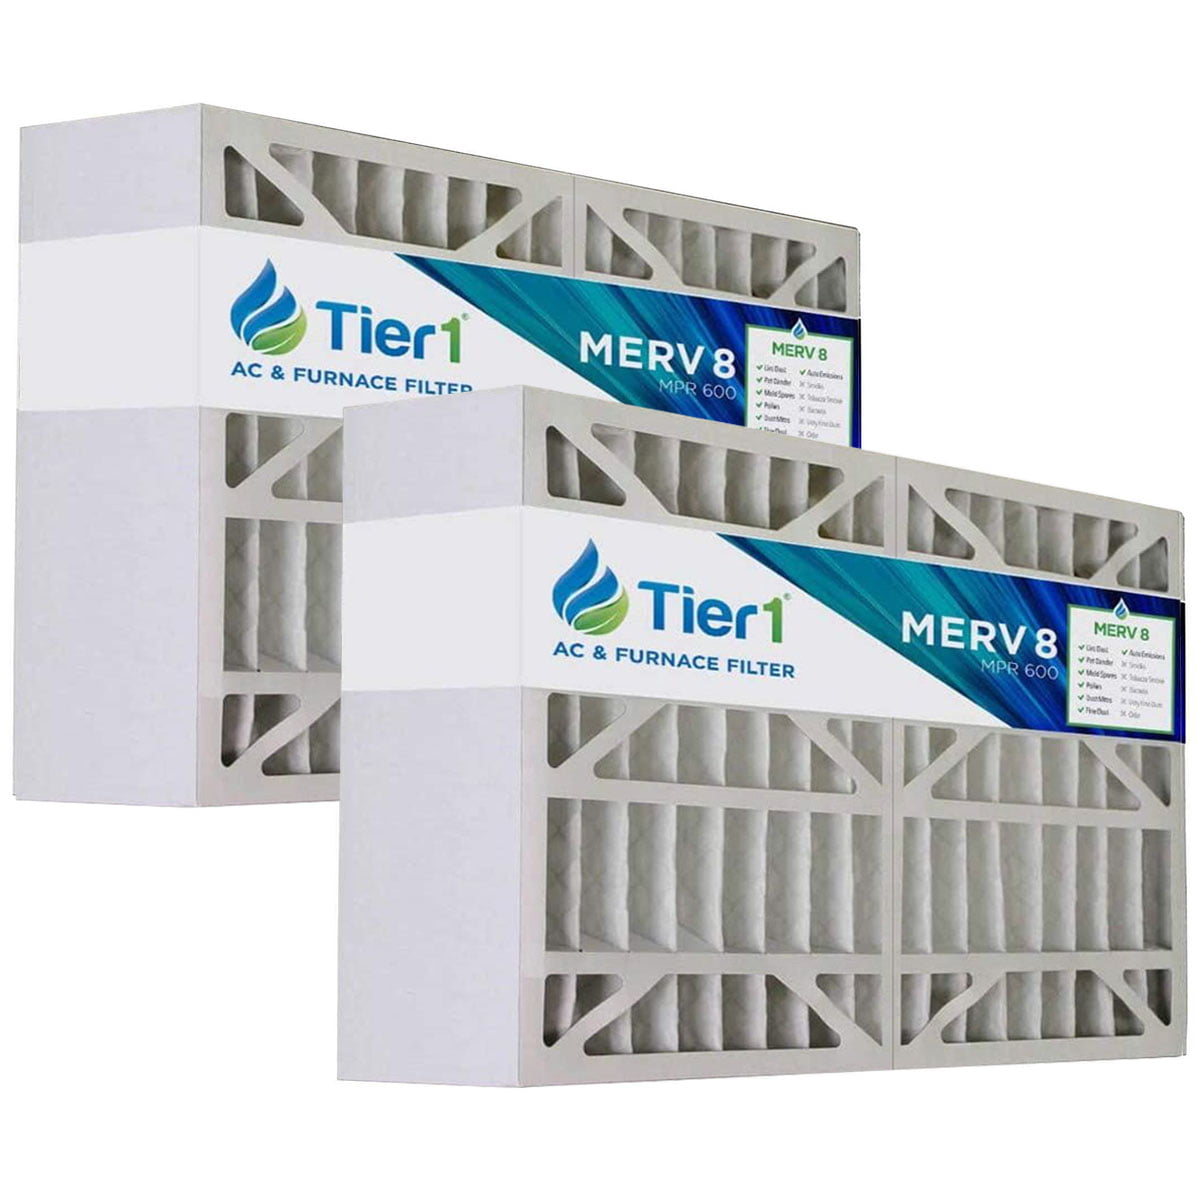 6 Pack Tier1 22x22x2 Dust and Pollen Merv 8 Replacement AC Furnace Air Filter 